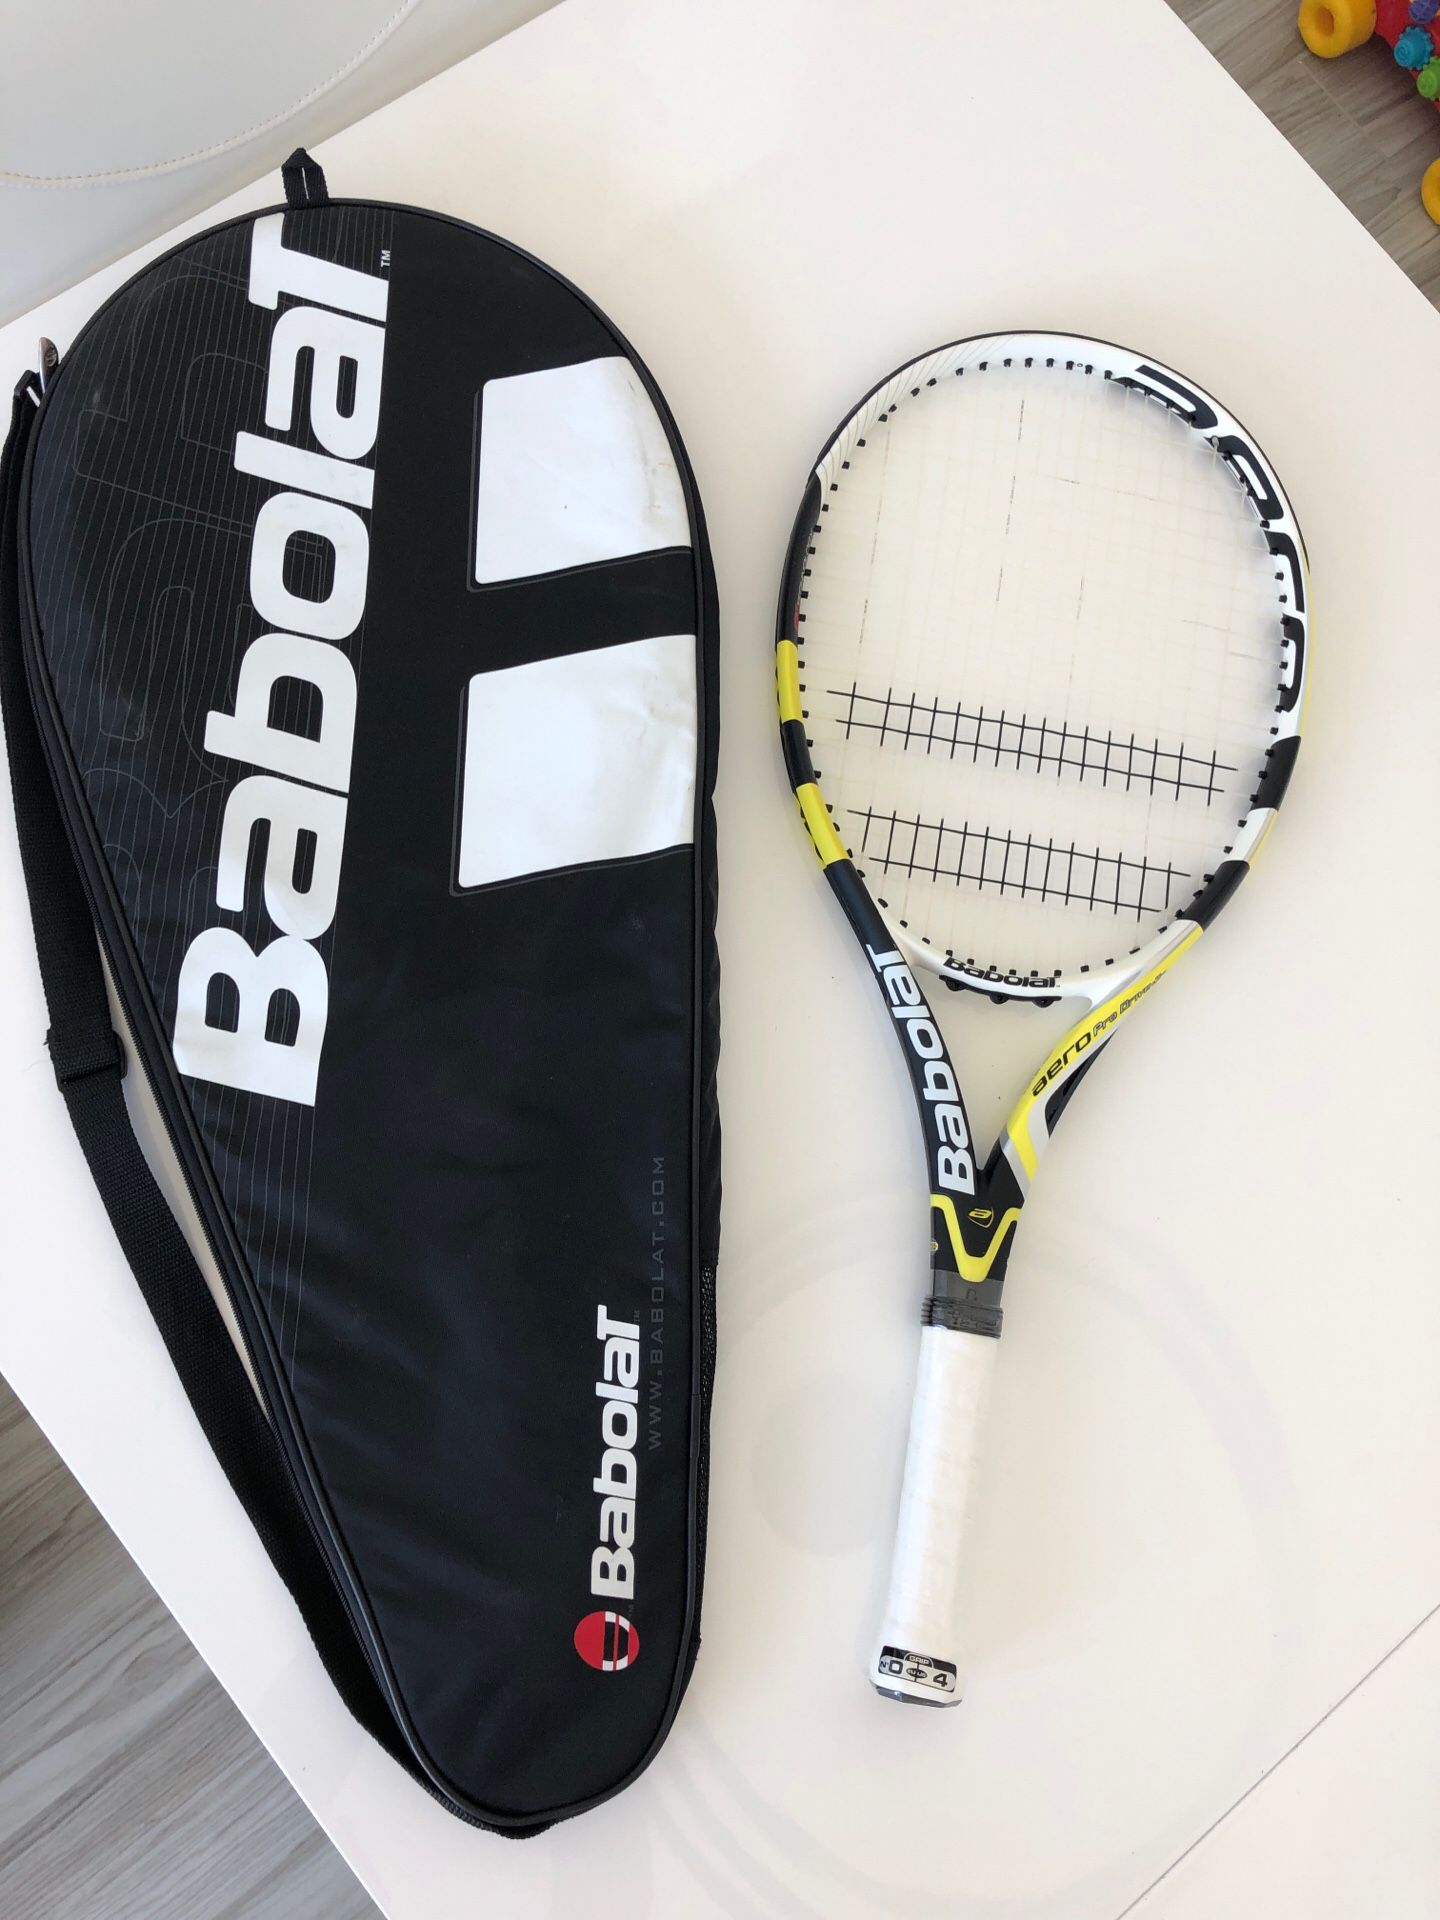 Tennis racket and case. Babolat pro drive Jr. BRAND NEW